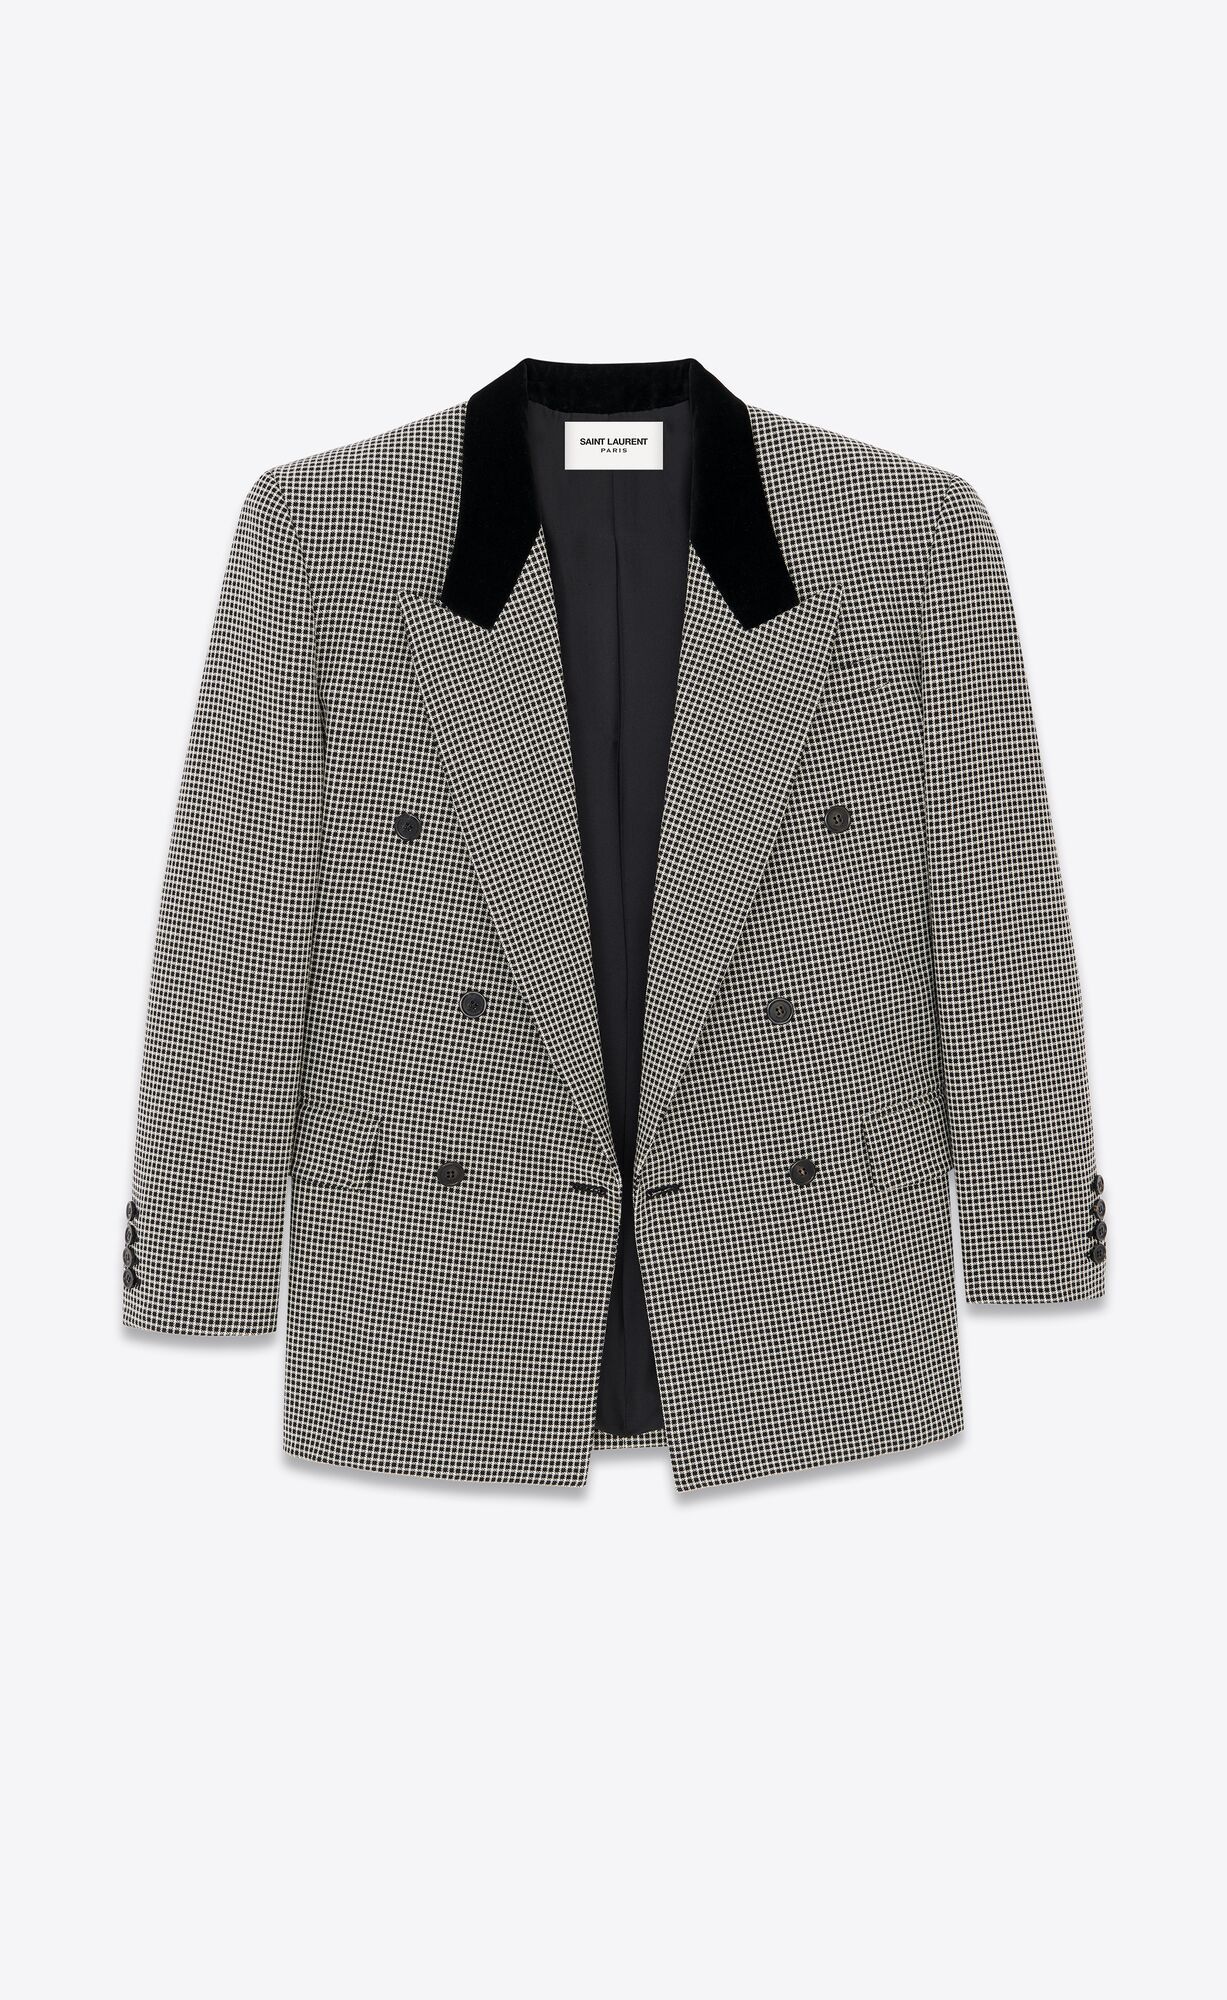 double-breasted, six-button jacket made with responsible wool, featuring a velvet collar, peaked ... | Saint Laurent Inc. (Global)